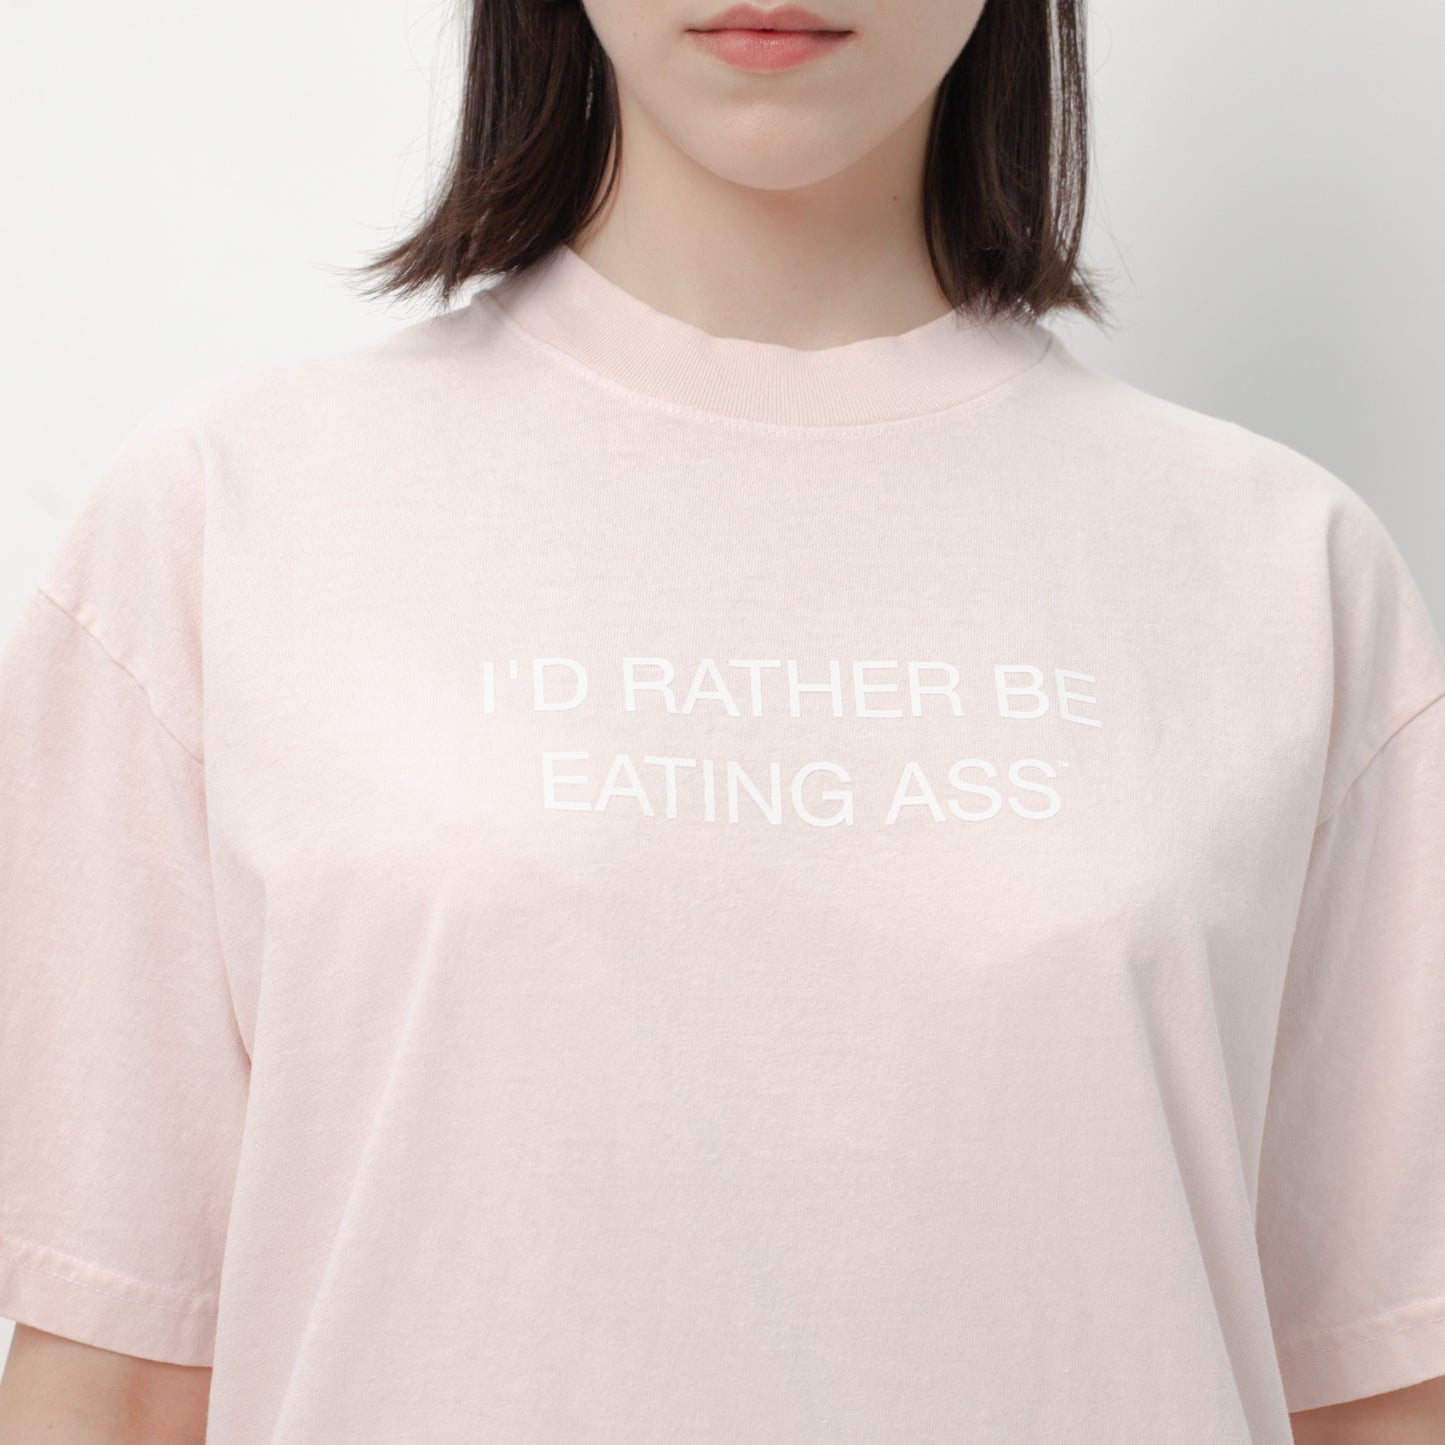 I'D RATHER BE EATING ASS OVERSIZED T-SHIRT - PINK